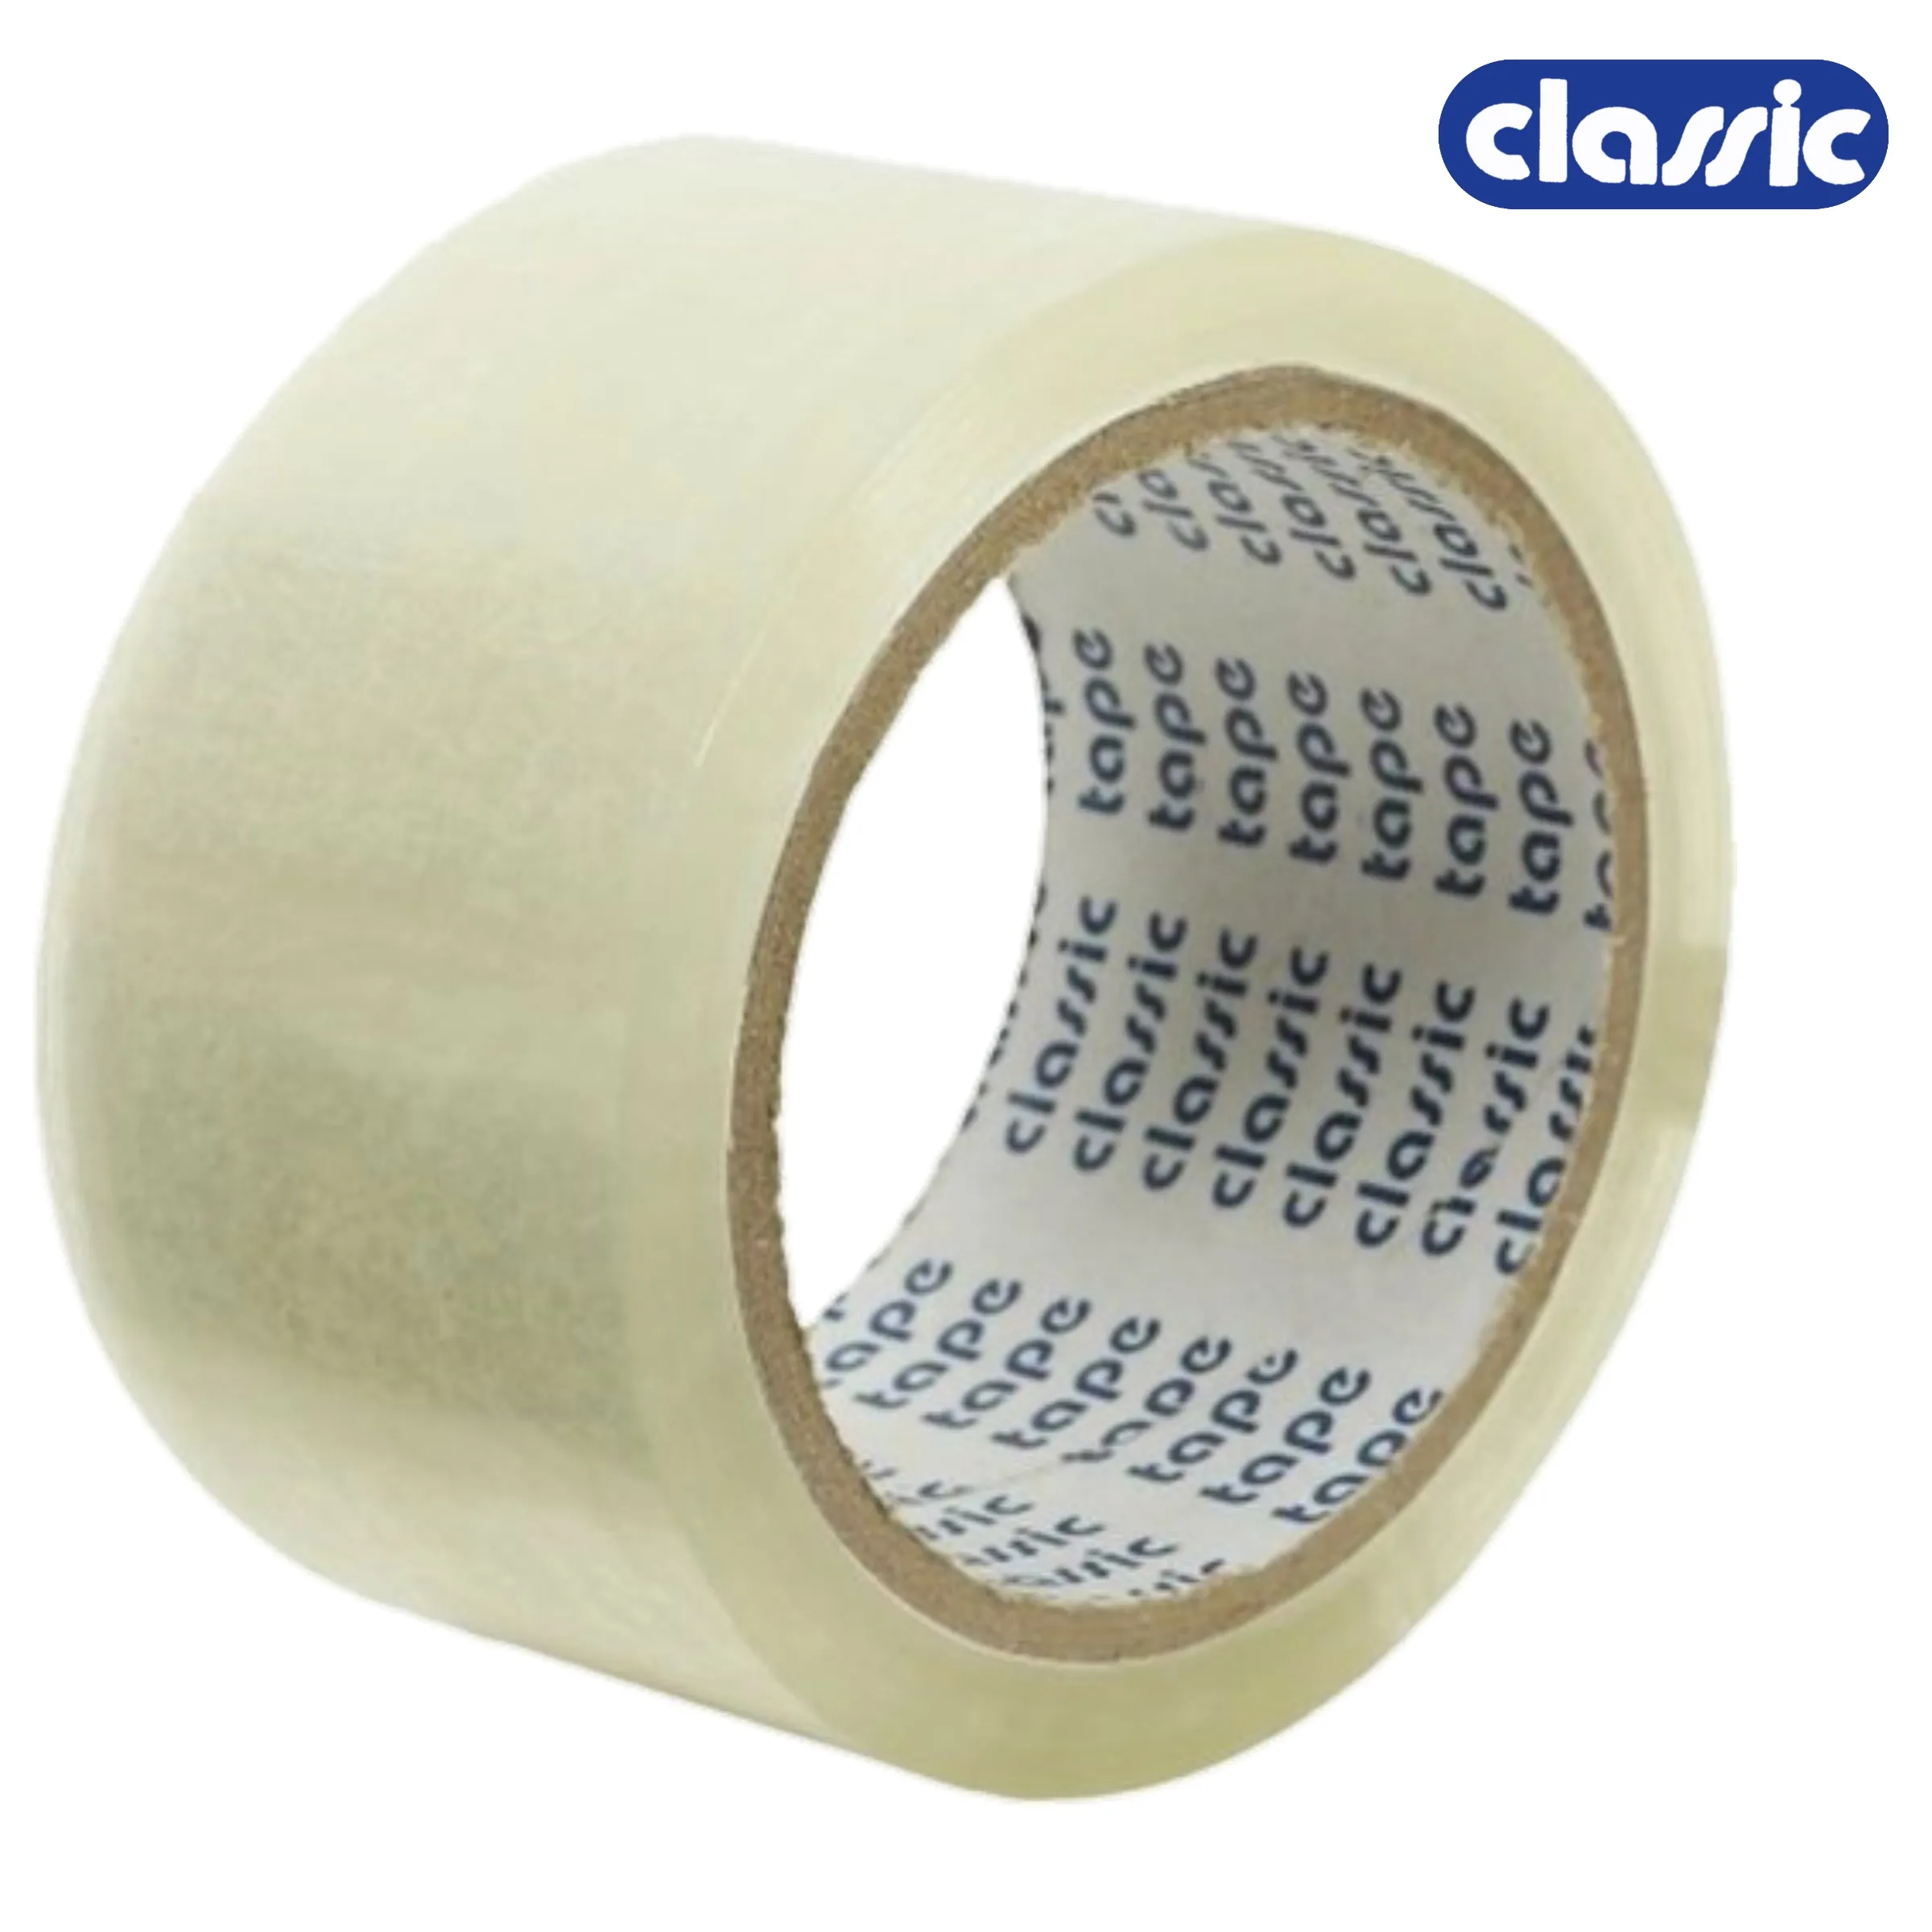 Classic 30 Micron 48 mm/2 Inch Transparent Self Adhesive Tape, Premium Quality,  Pack of 1 Roll